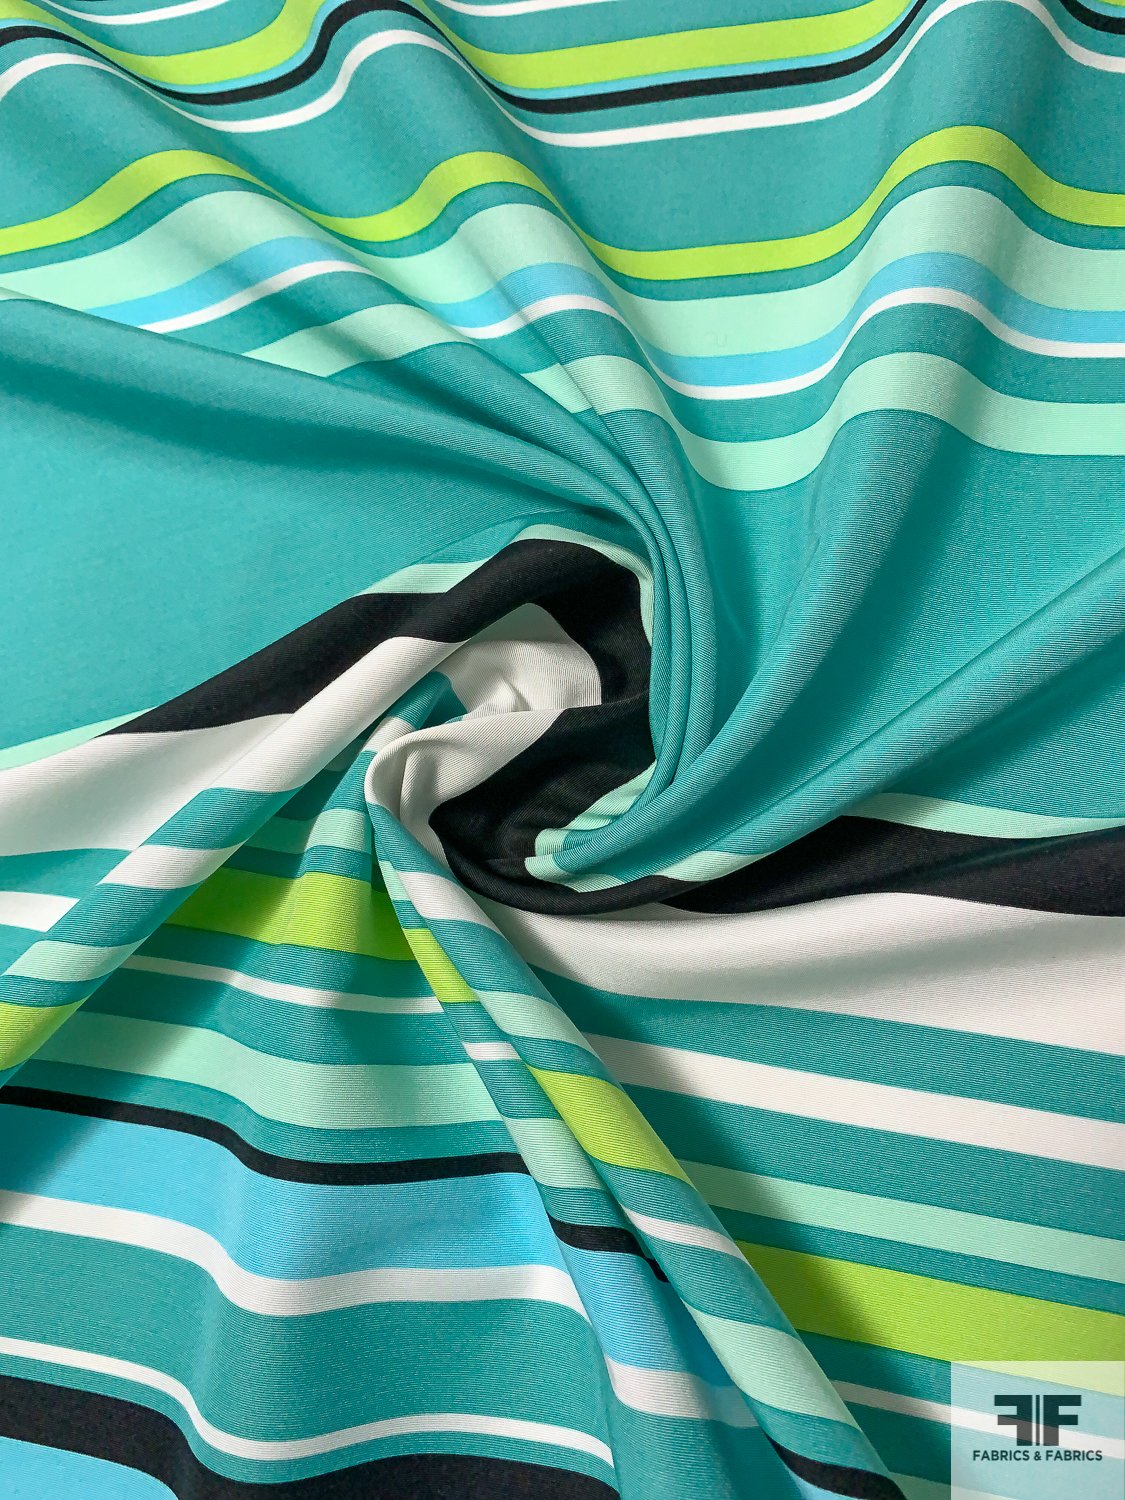 Multisize Stripe Printed Lightweight Cotton and Silk Faille Panel - Teal / Seafoam / Turquoise / Lime